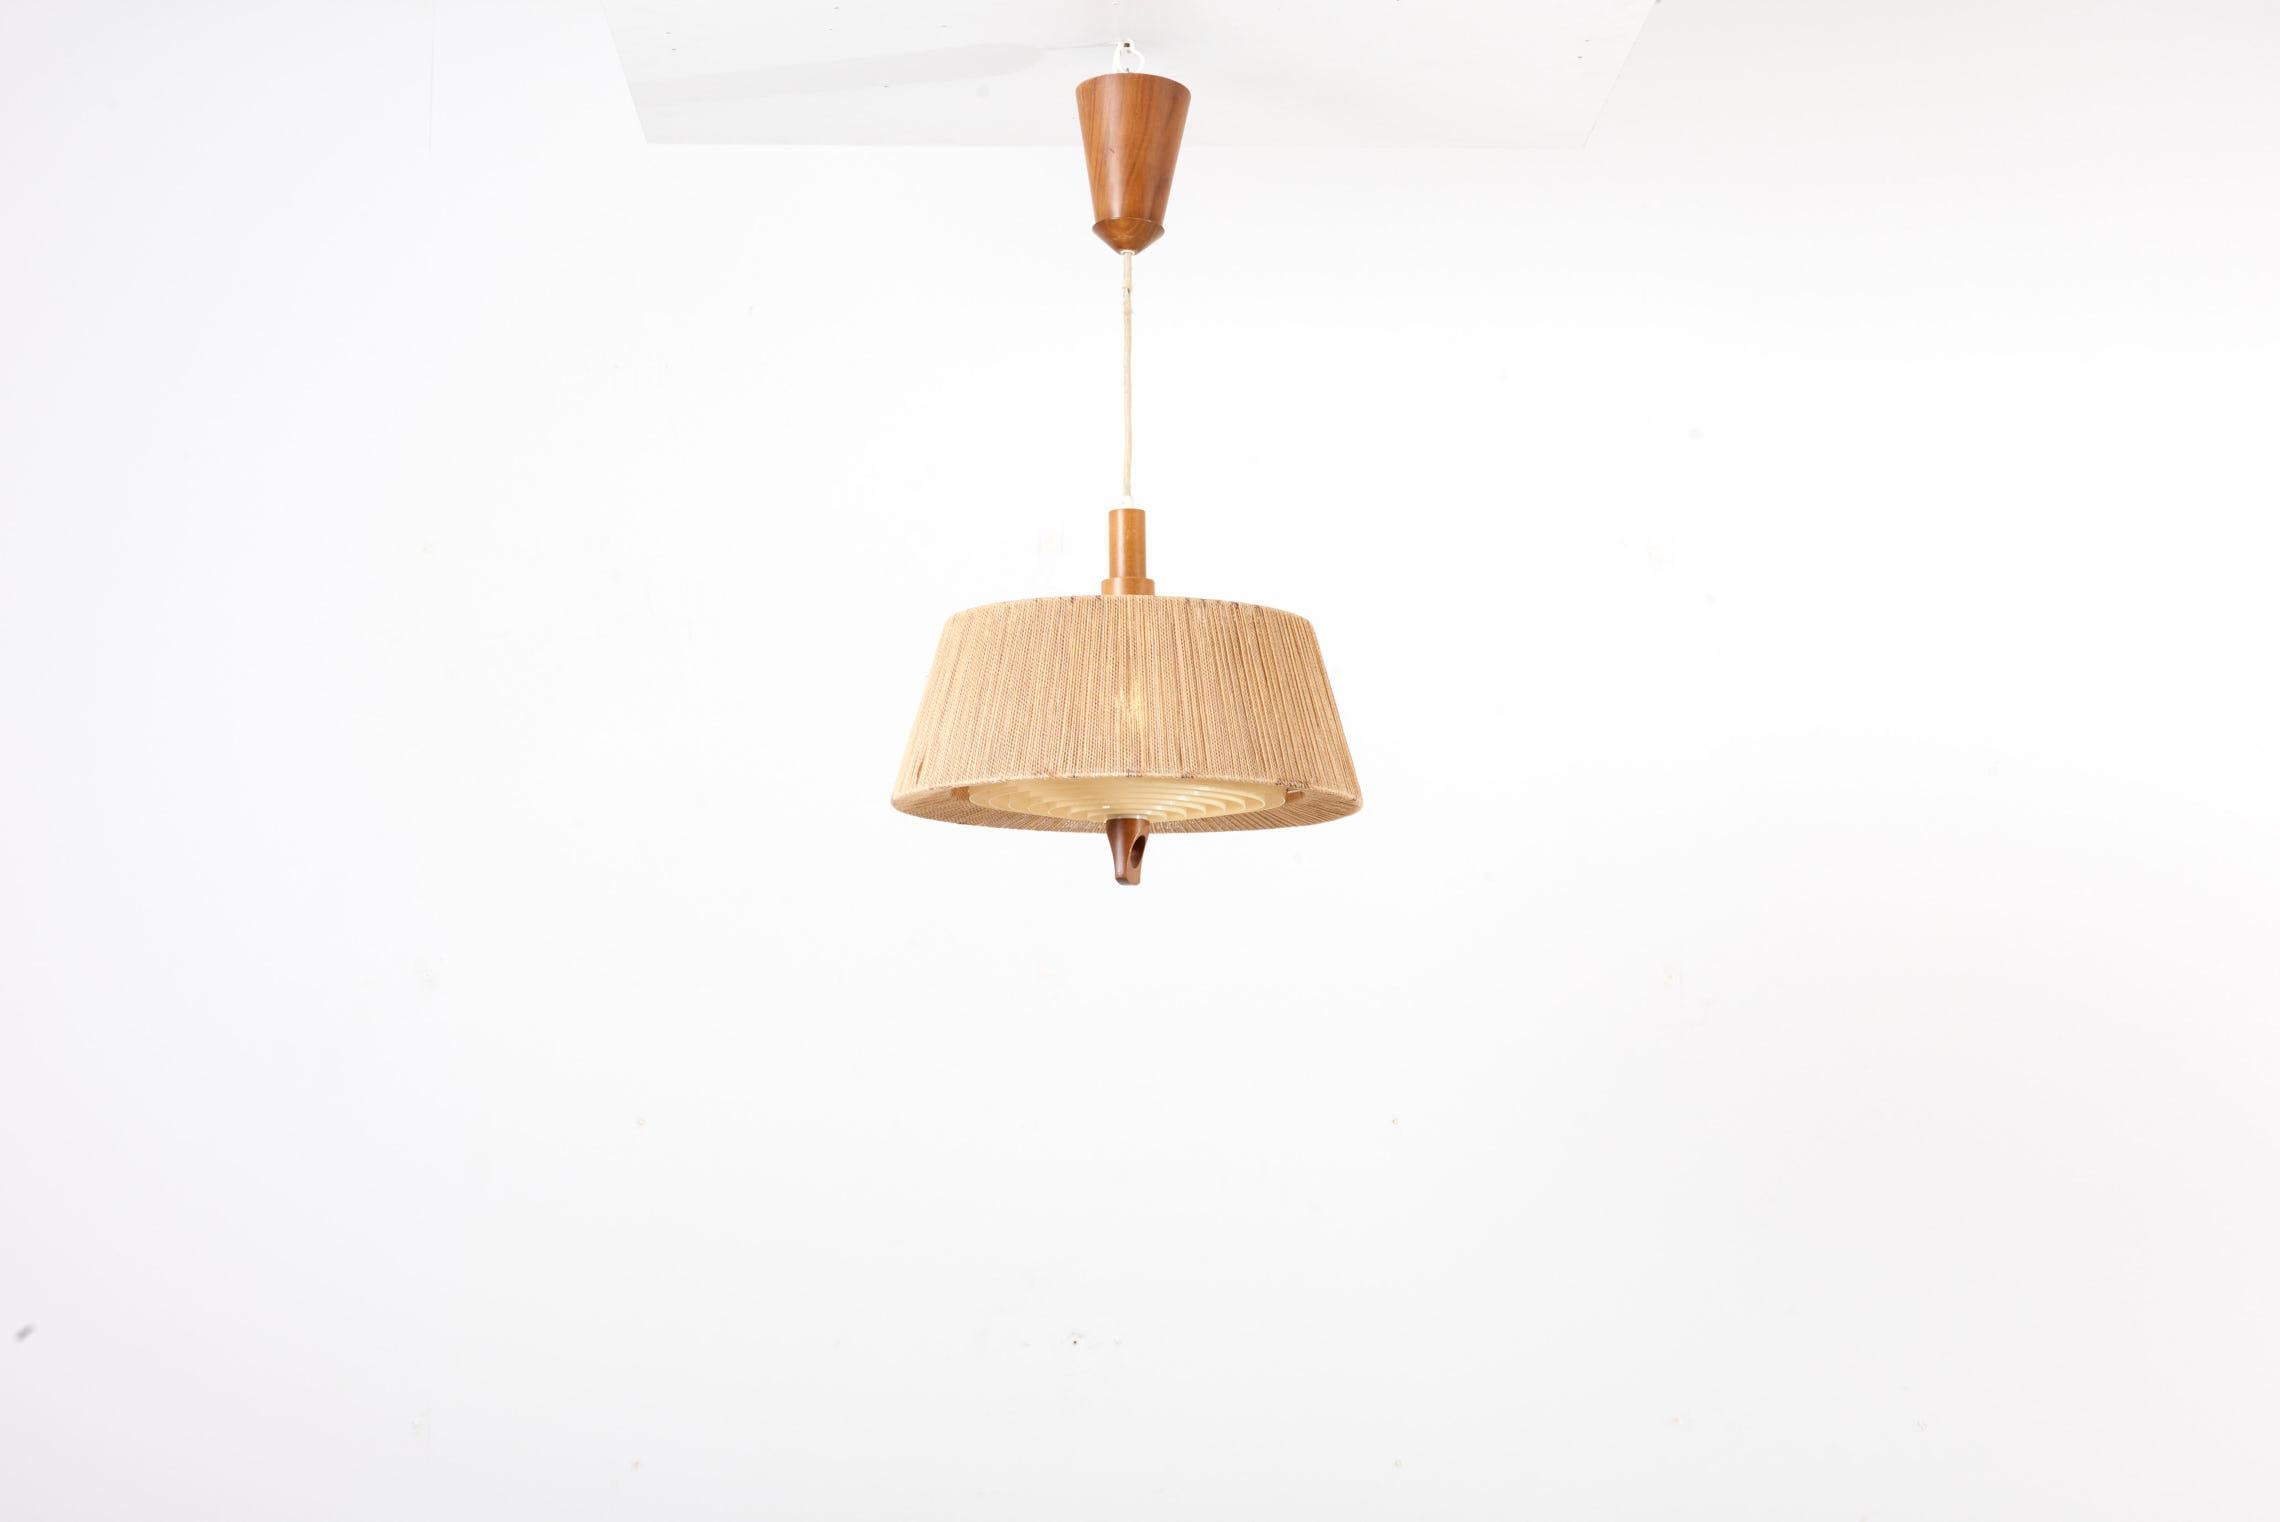 Temde Teak and Sisal pendant lamp, Switzerland 1950s. The height given applies to the shade. This Lamp has a height adjustment system in its canopy. The perspex diffuser is in excellent condition and the teak detail on the shade is very special and